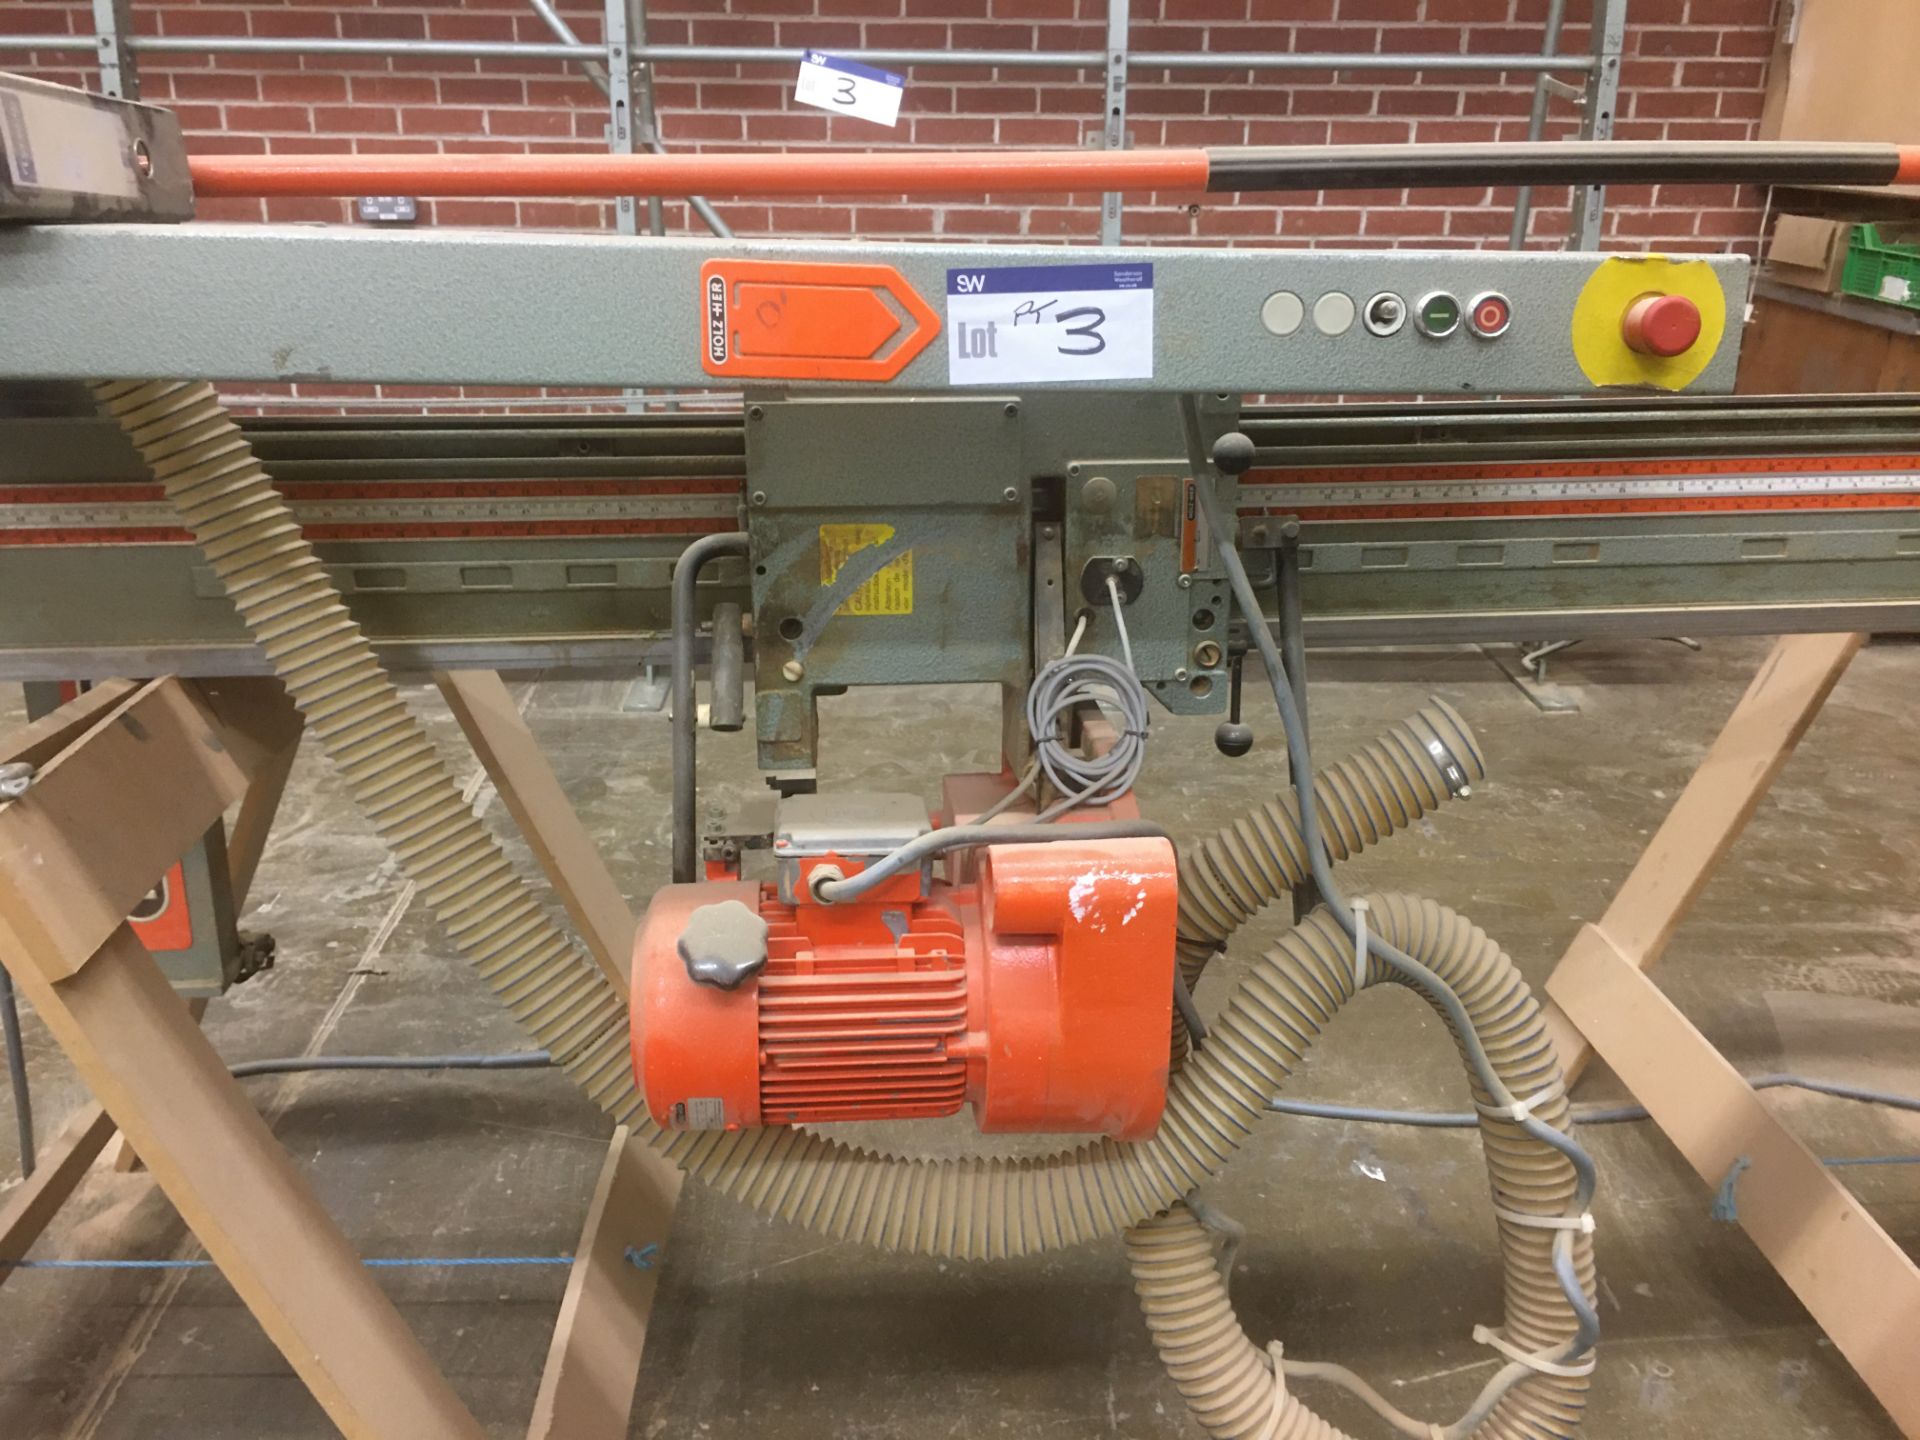 Holzher 1265 Super Cut Wall Saw, serial no. 1503/8 - Image 2 of 3